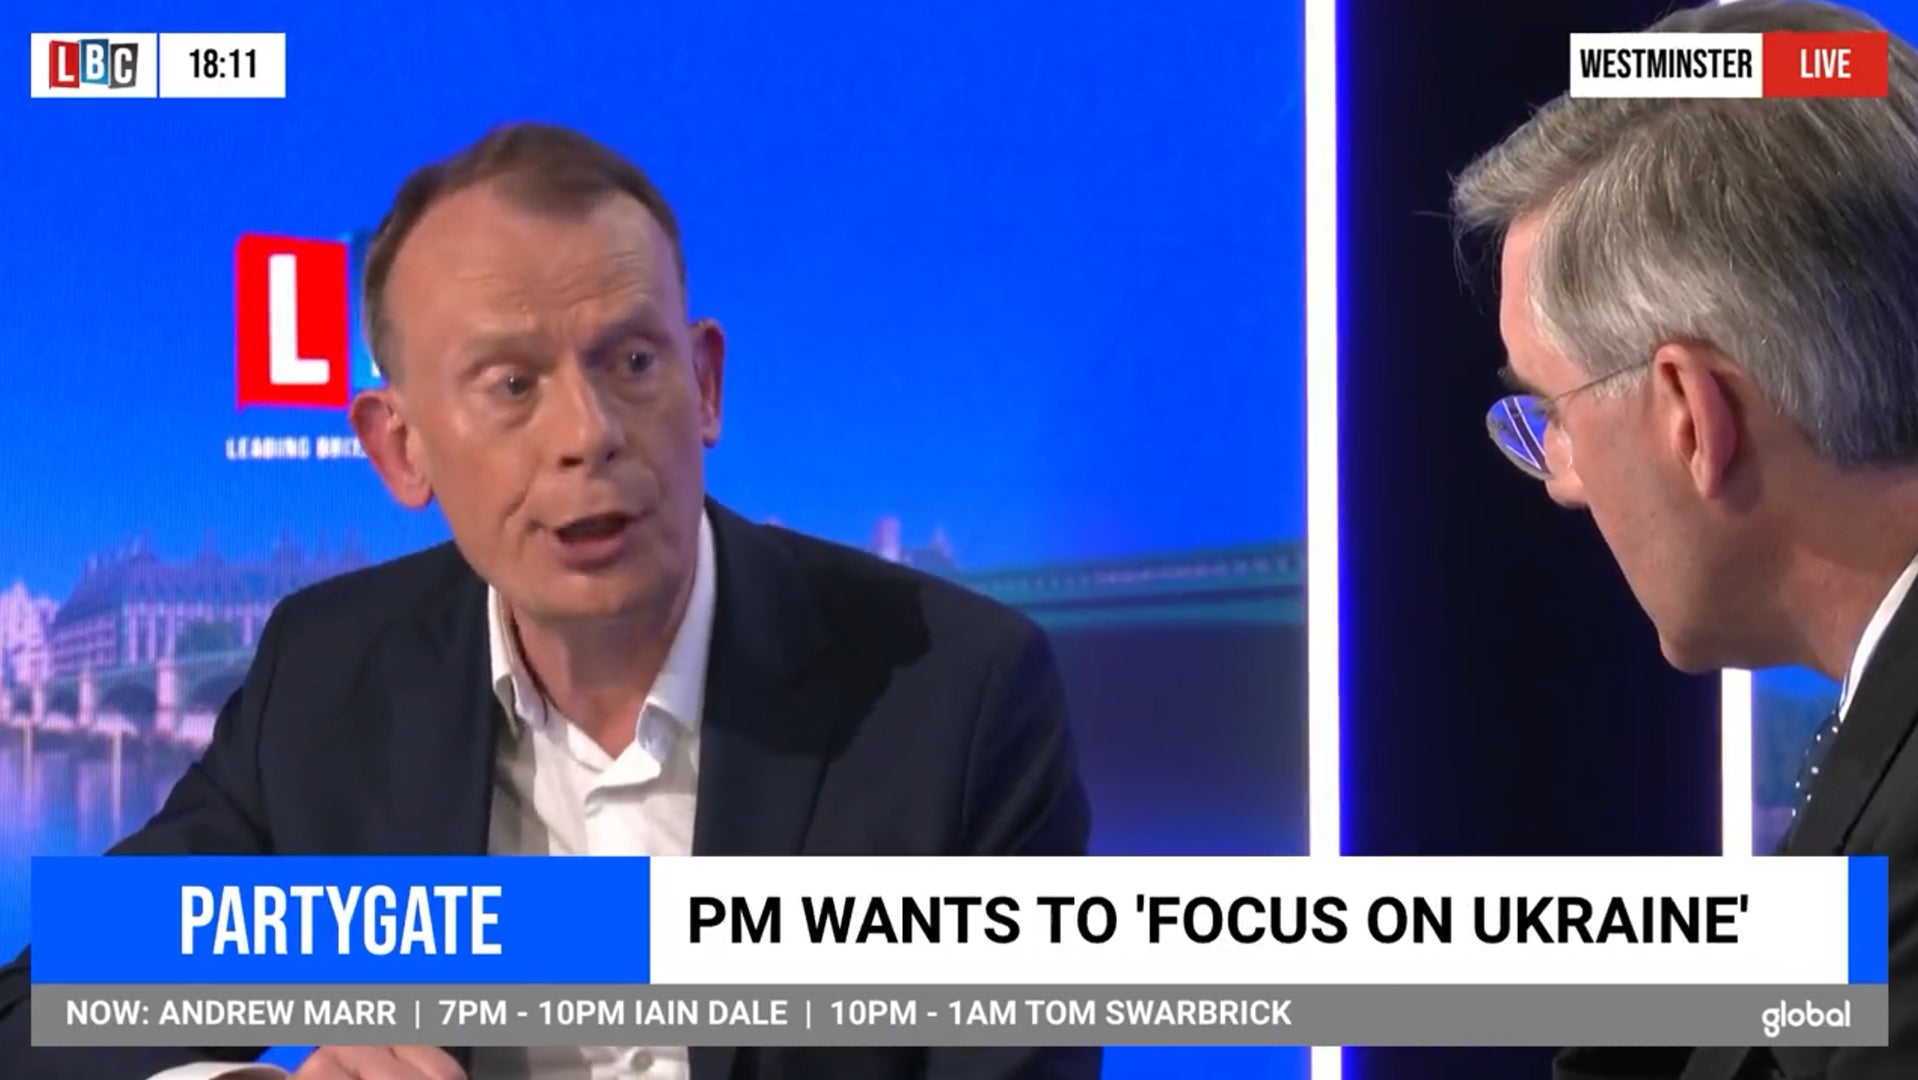 Marr said he was ‘intensely angry’ about Partygate revelations